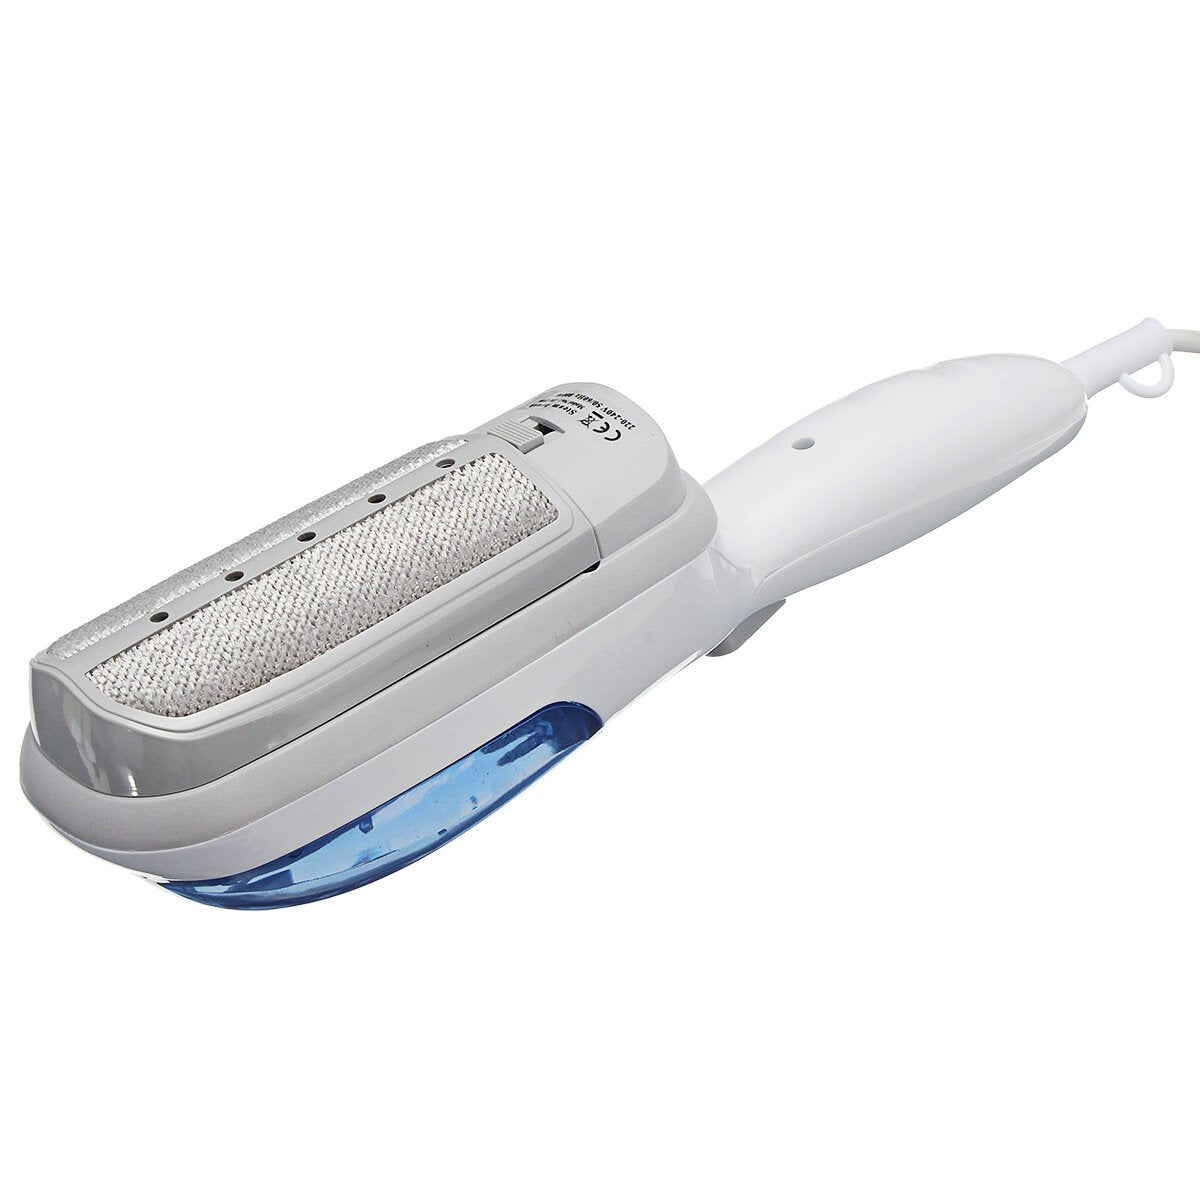 Portable Travel Handheld Steam Iron Garment Steamer with Brush For Clothes 110V 800W